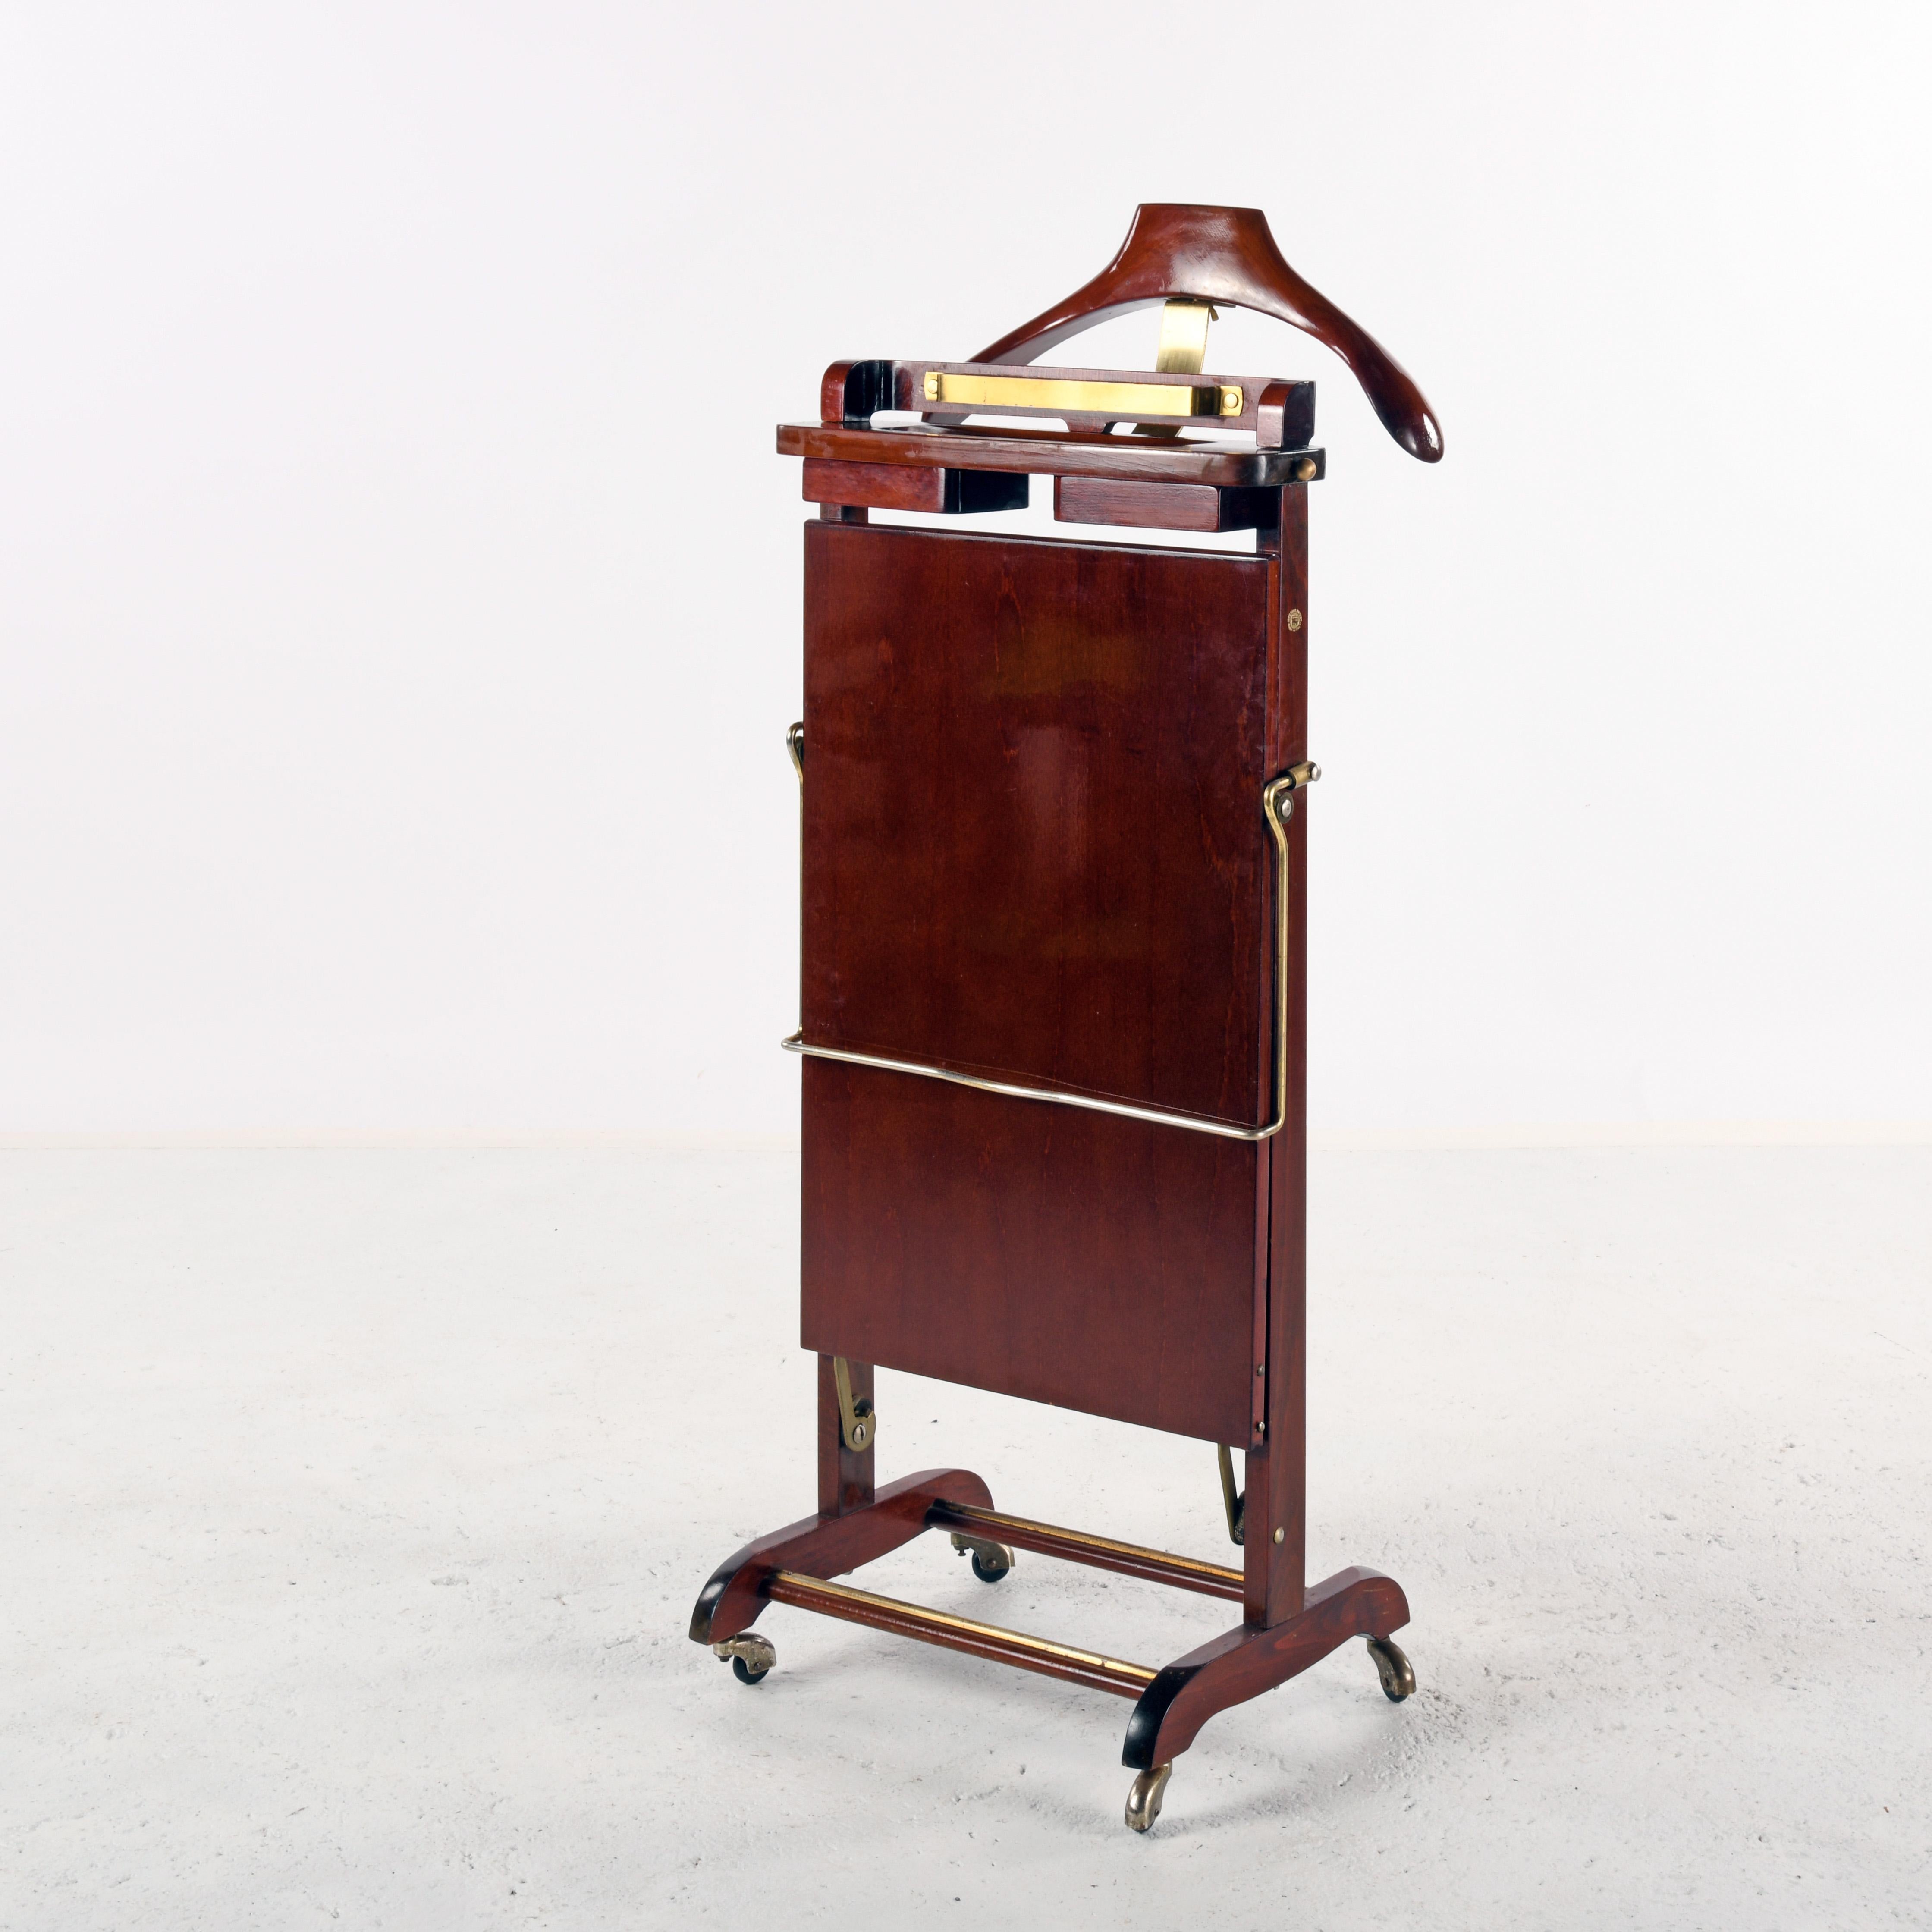 Varnished wooden valet on wheels, produced in Italy in the 1960s by Fratelli Reguitti. Shirt and jacket hanger at the back, trouser press with foam-lined interior to smooth out wrinkles overnight, two retractable felt-lined boxes to hold cufflinks,